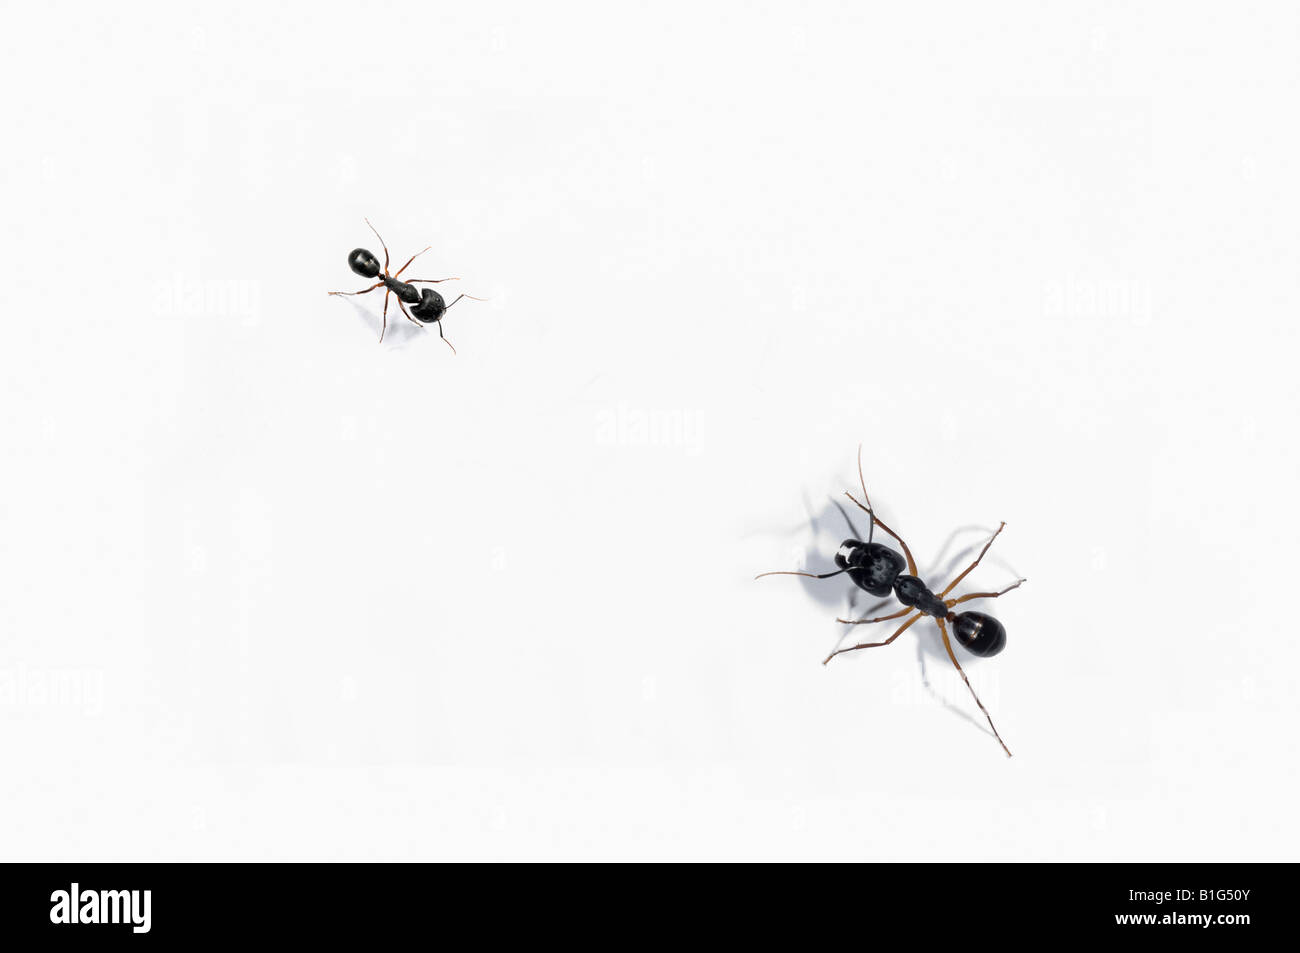 Large ant confronting a smaller ant Stock Photo